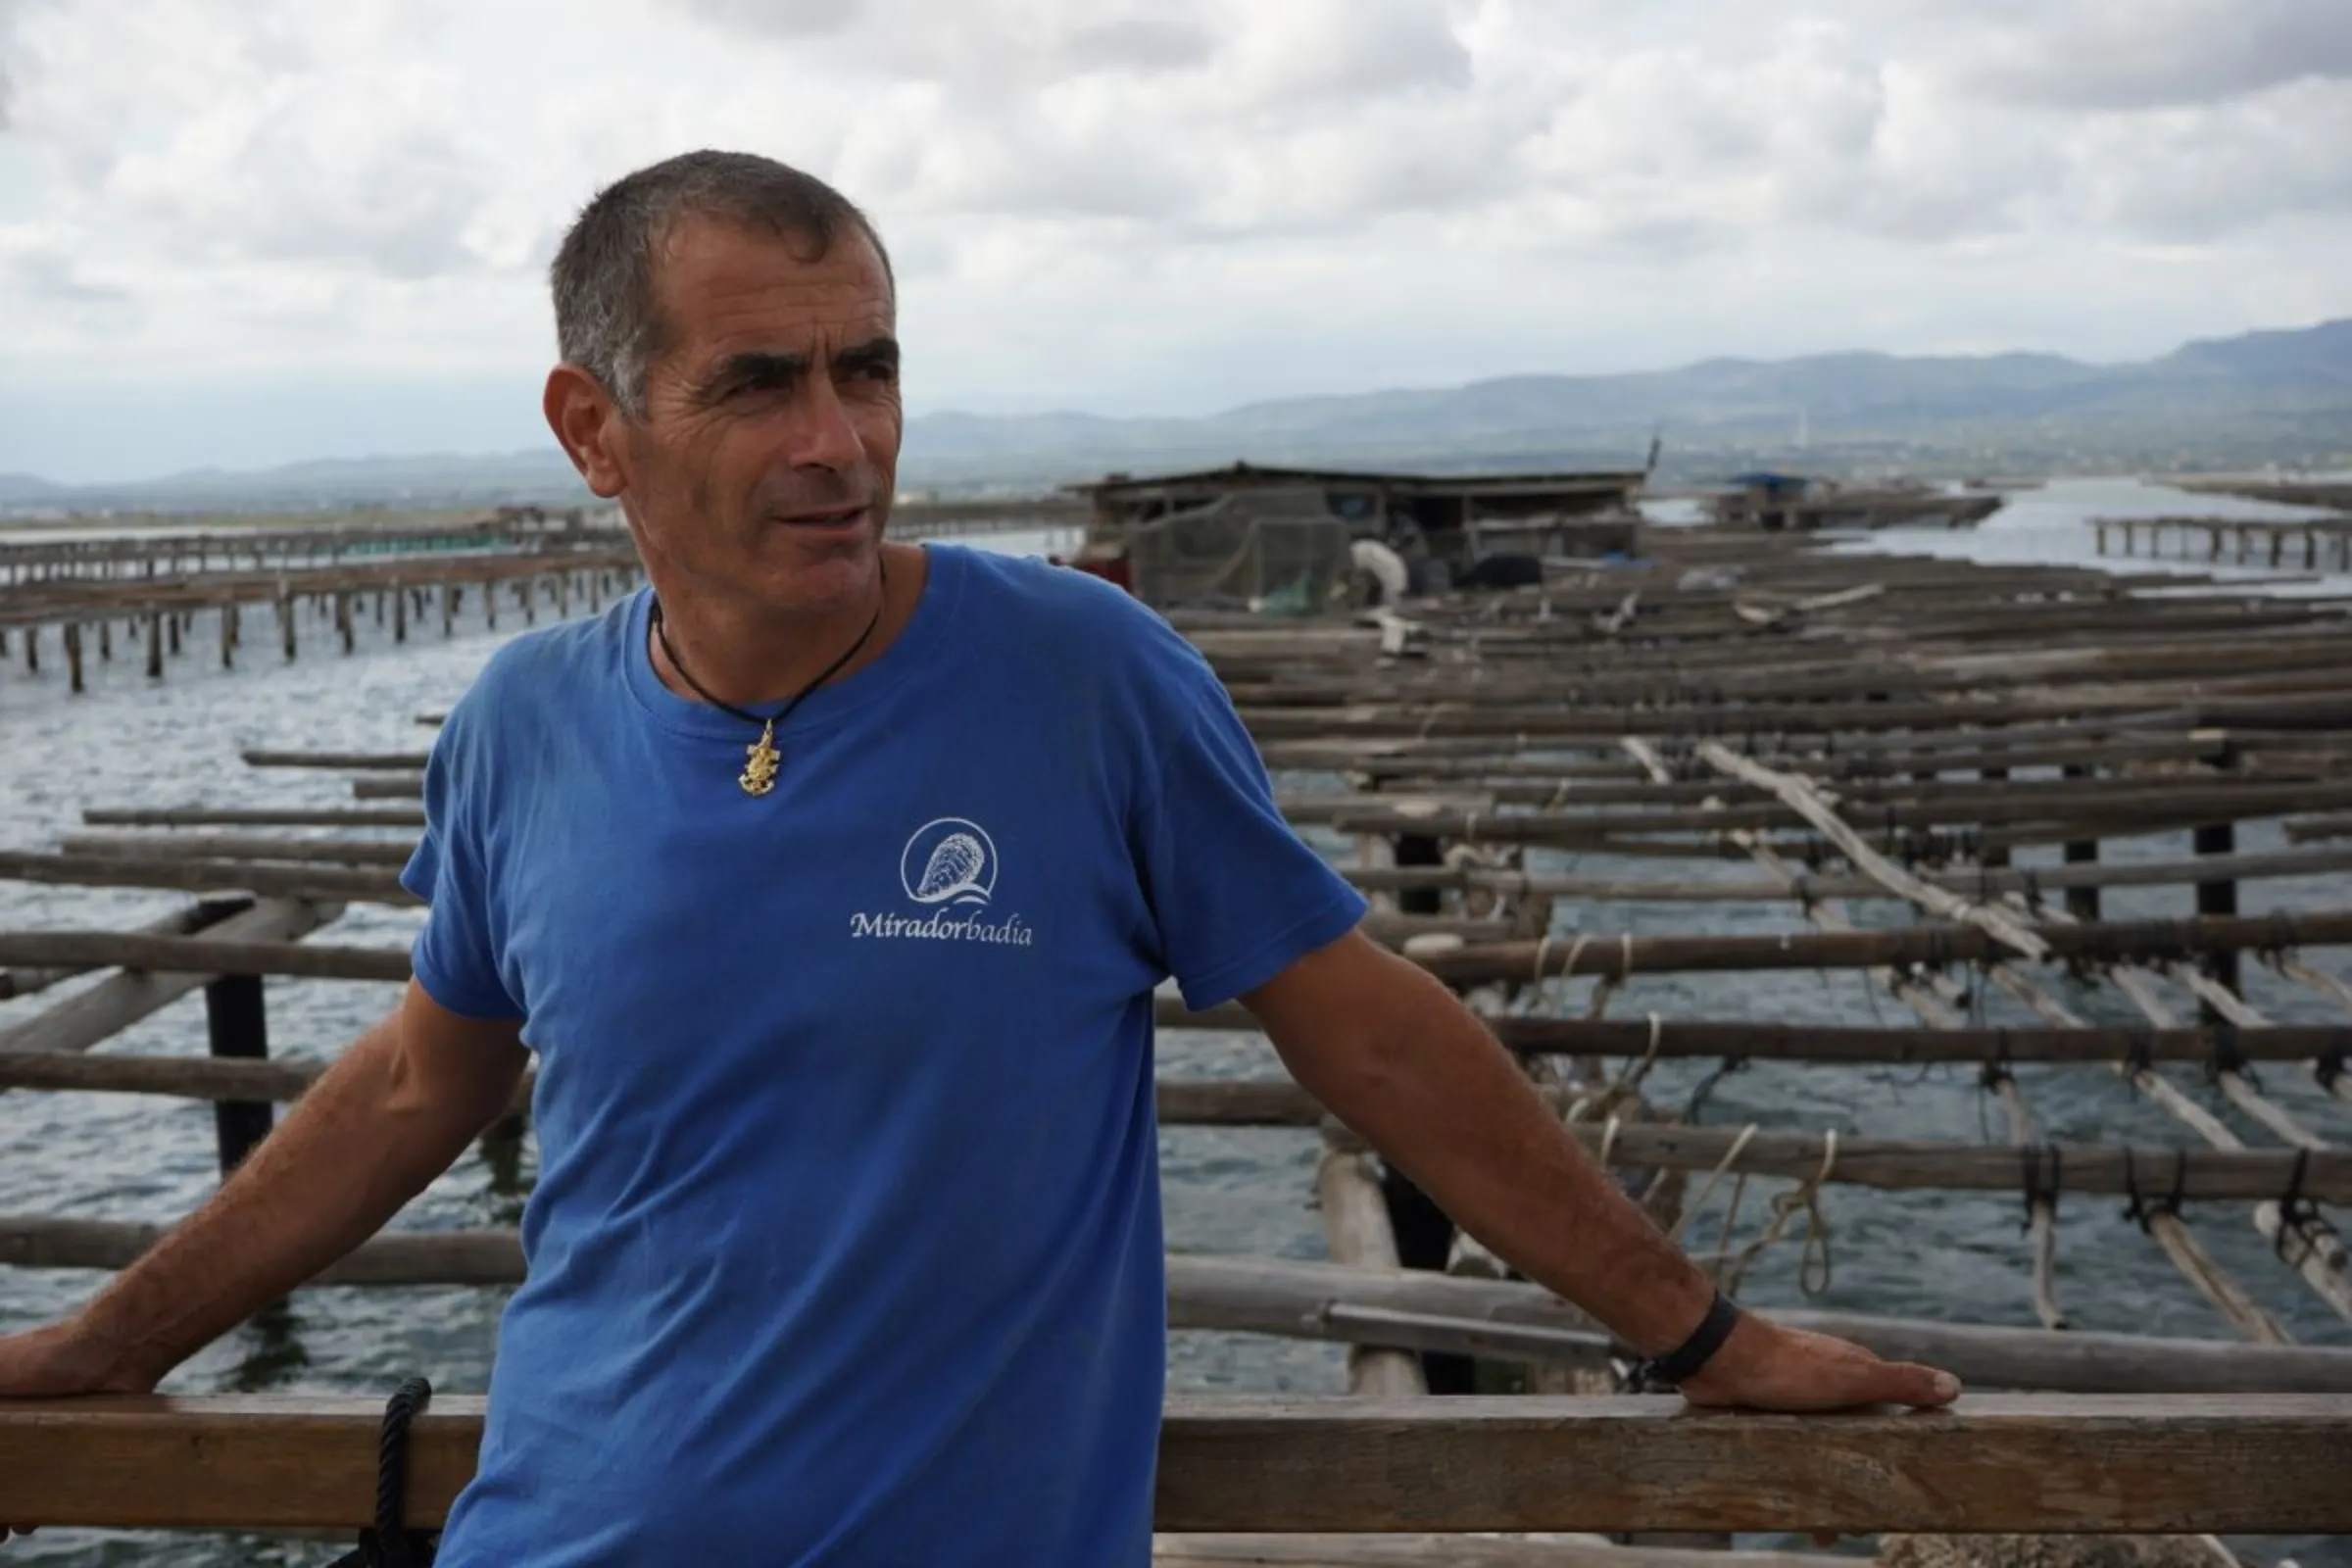 Xavier Cabrera poses at his mussel farm, in the Ebro Delta region of Catalunya, Spain, September 1, 2023. A decade ago, Cabrera harvested some 10,000 tonnes of mussels each season. But for the past few years, production has tumbled to around 1,500 tonnes. Thomson Reuters Foundation/Naomi Mihara